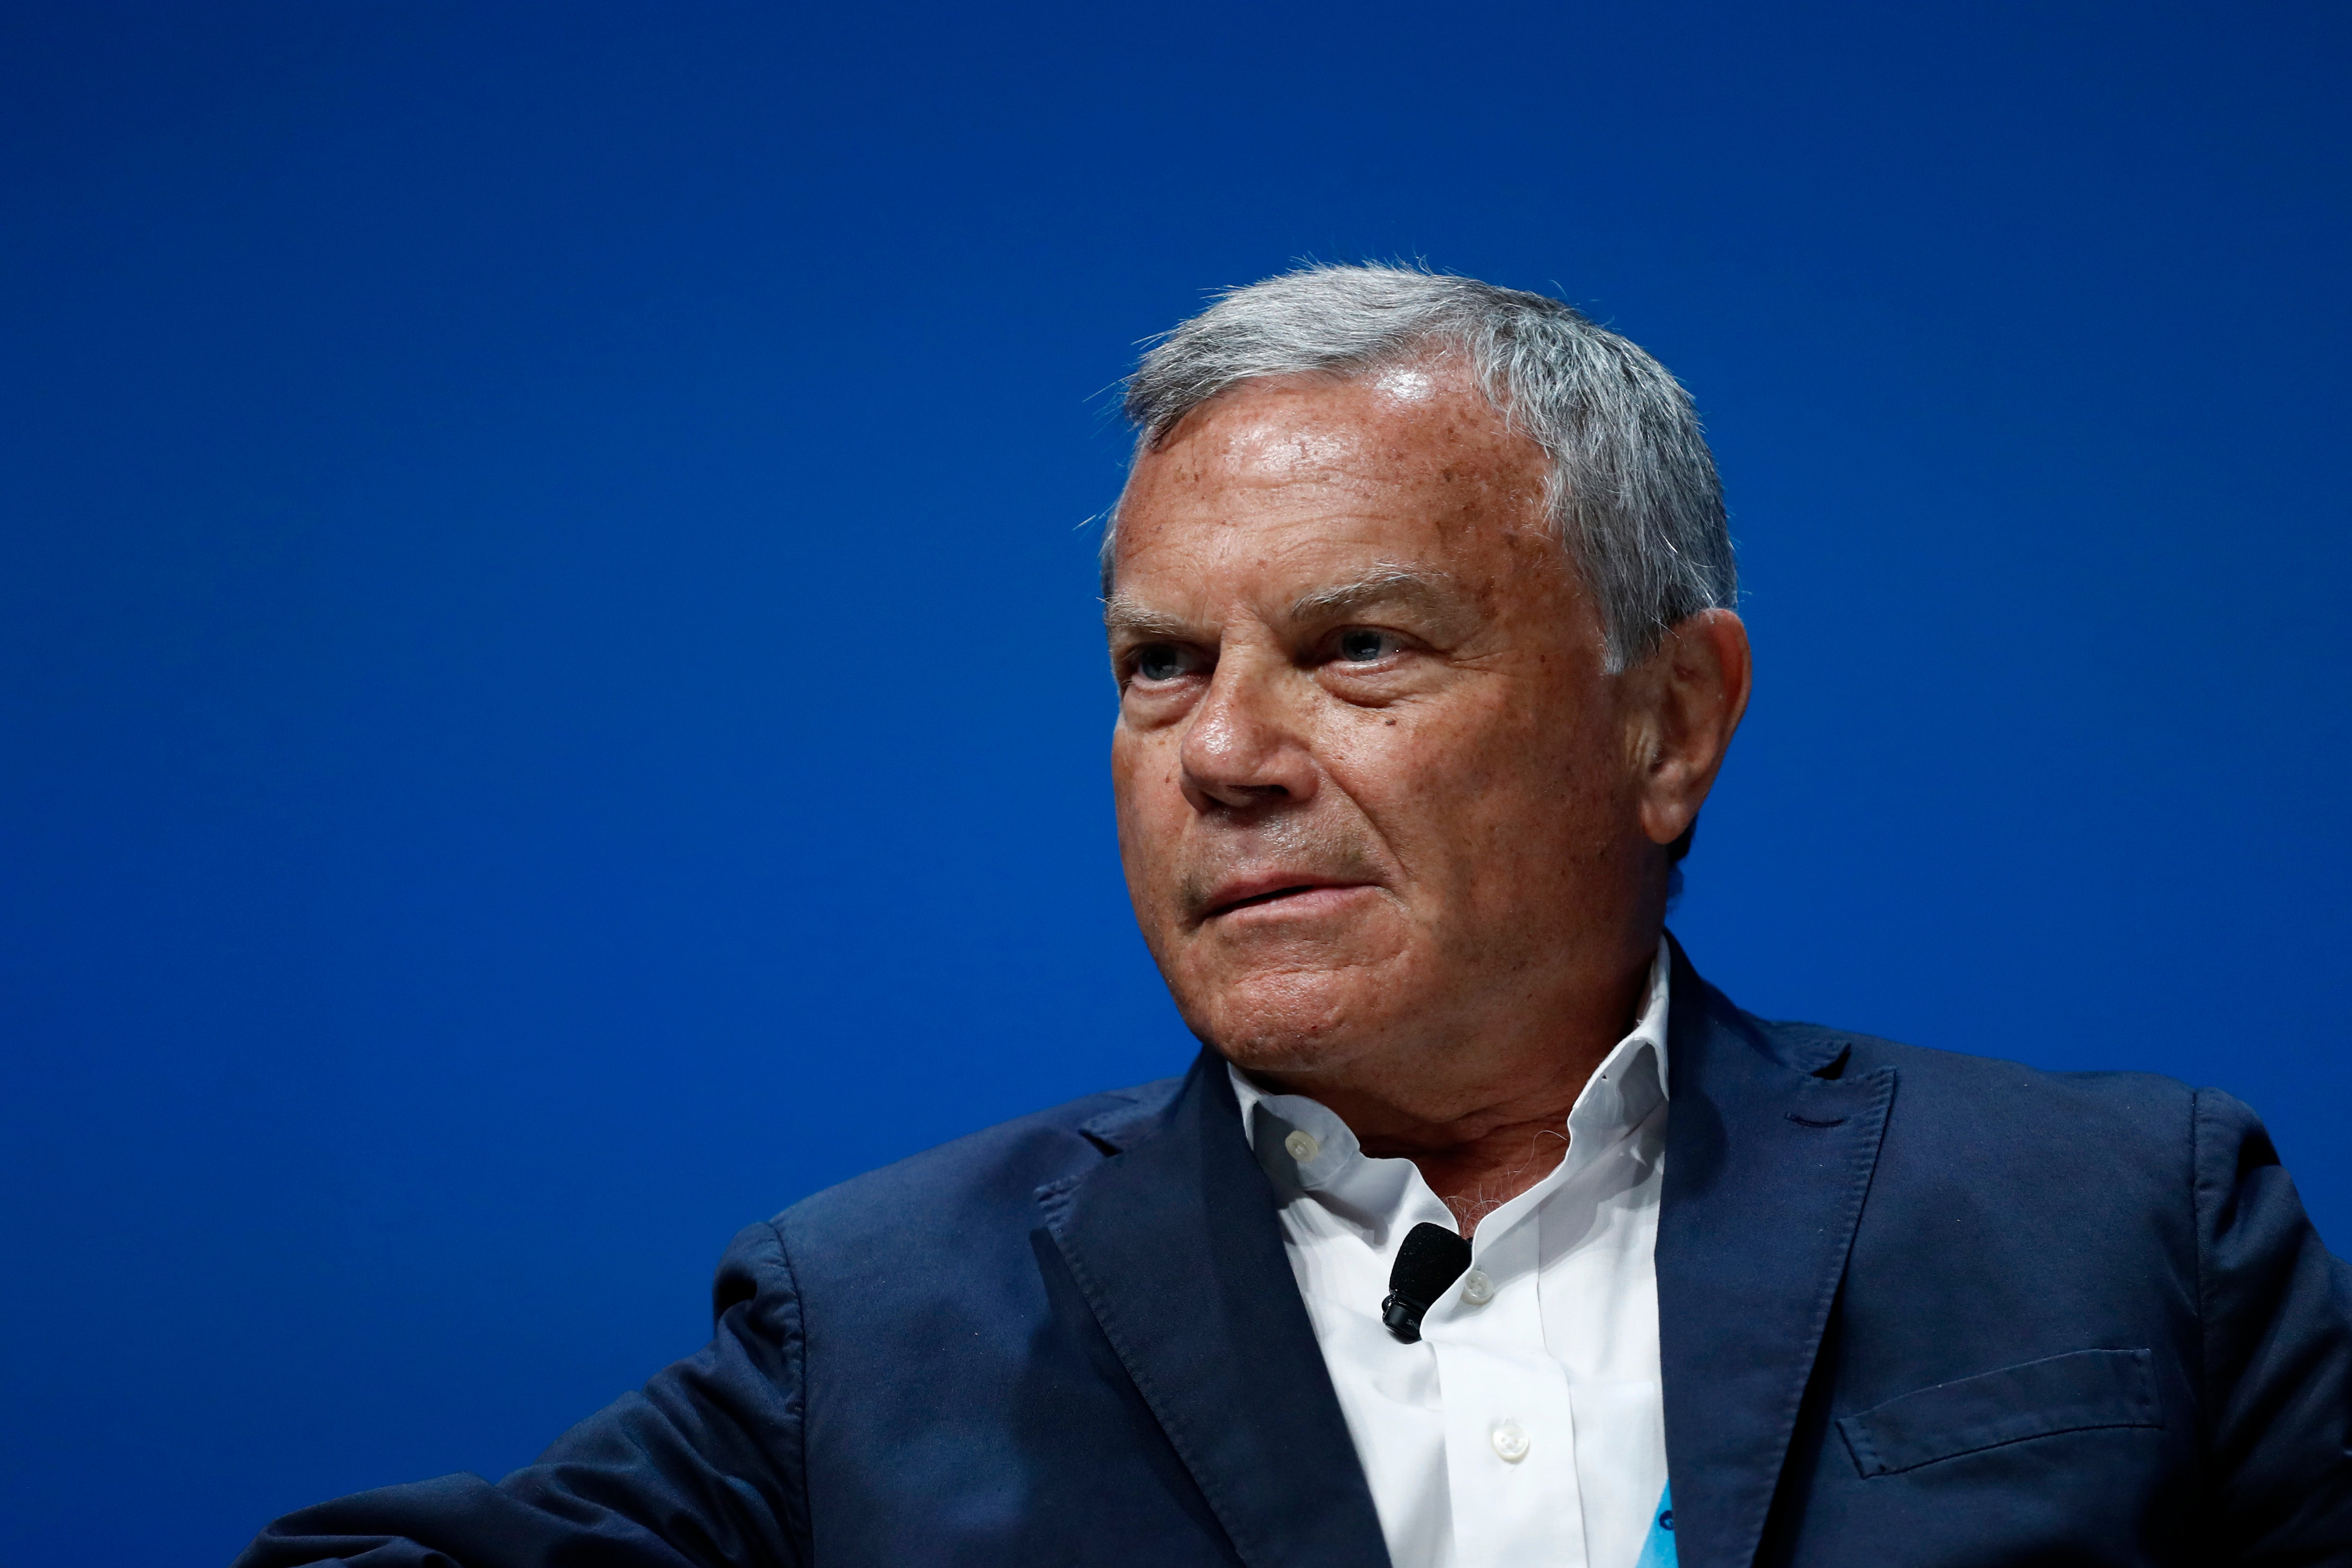 Sorrell speaks during the the Cannes Debate at the Cannes Lions Festival in 2018